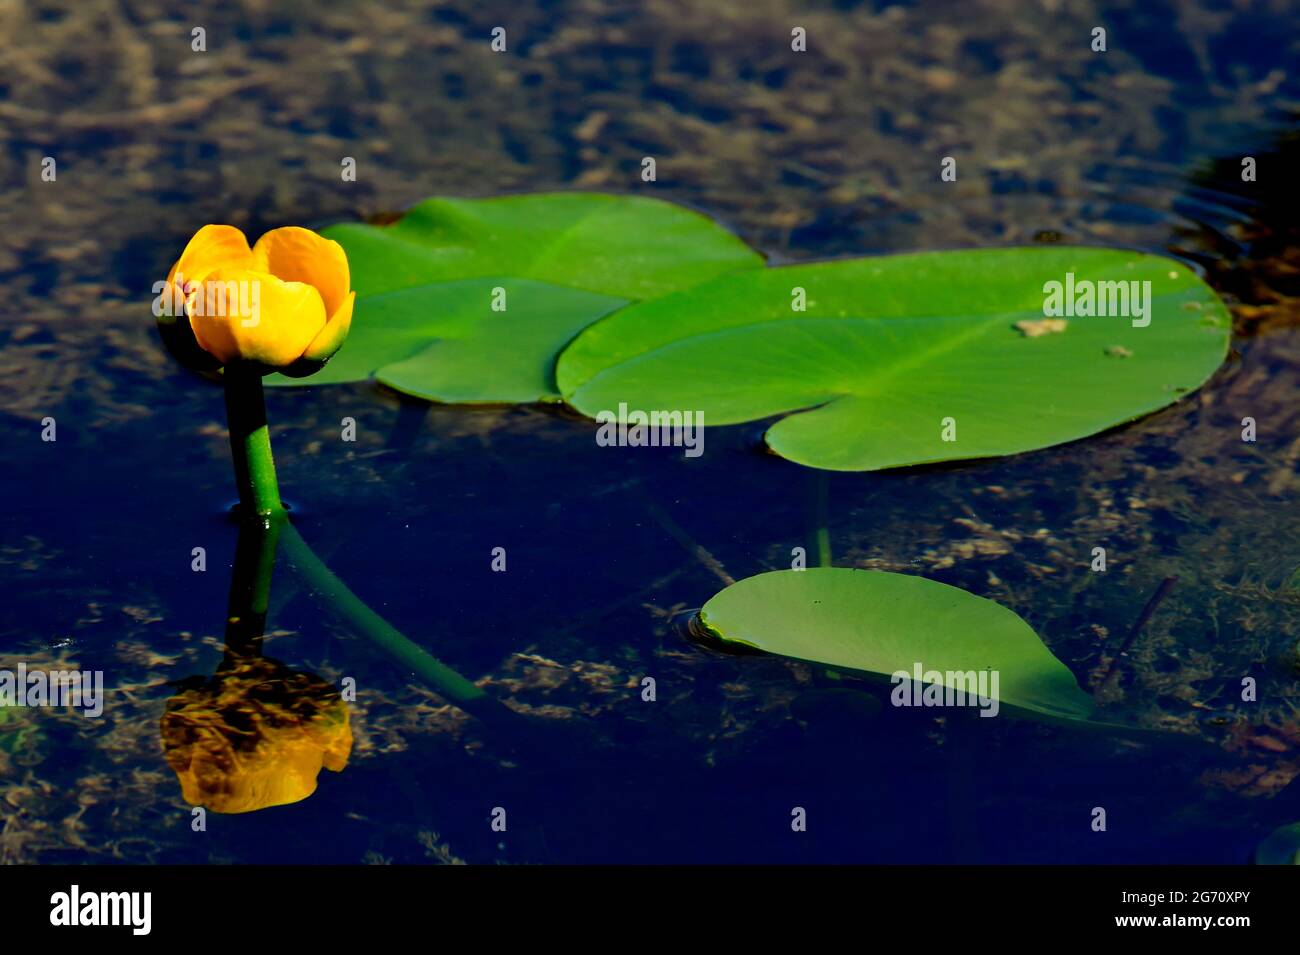 Lily pads with yellow blossoms 'Nuphar lutea', growing in a shallow water pond Stock Photo